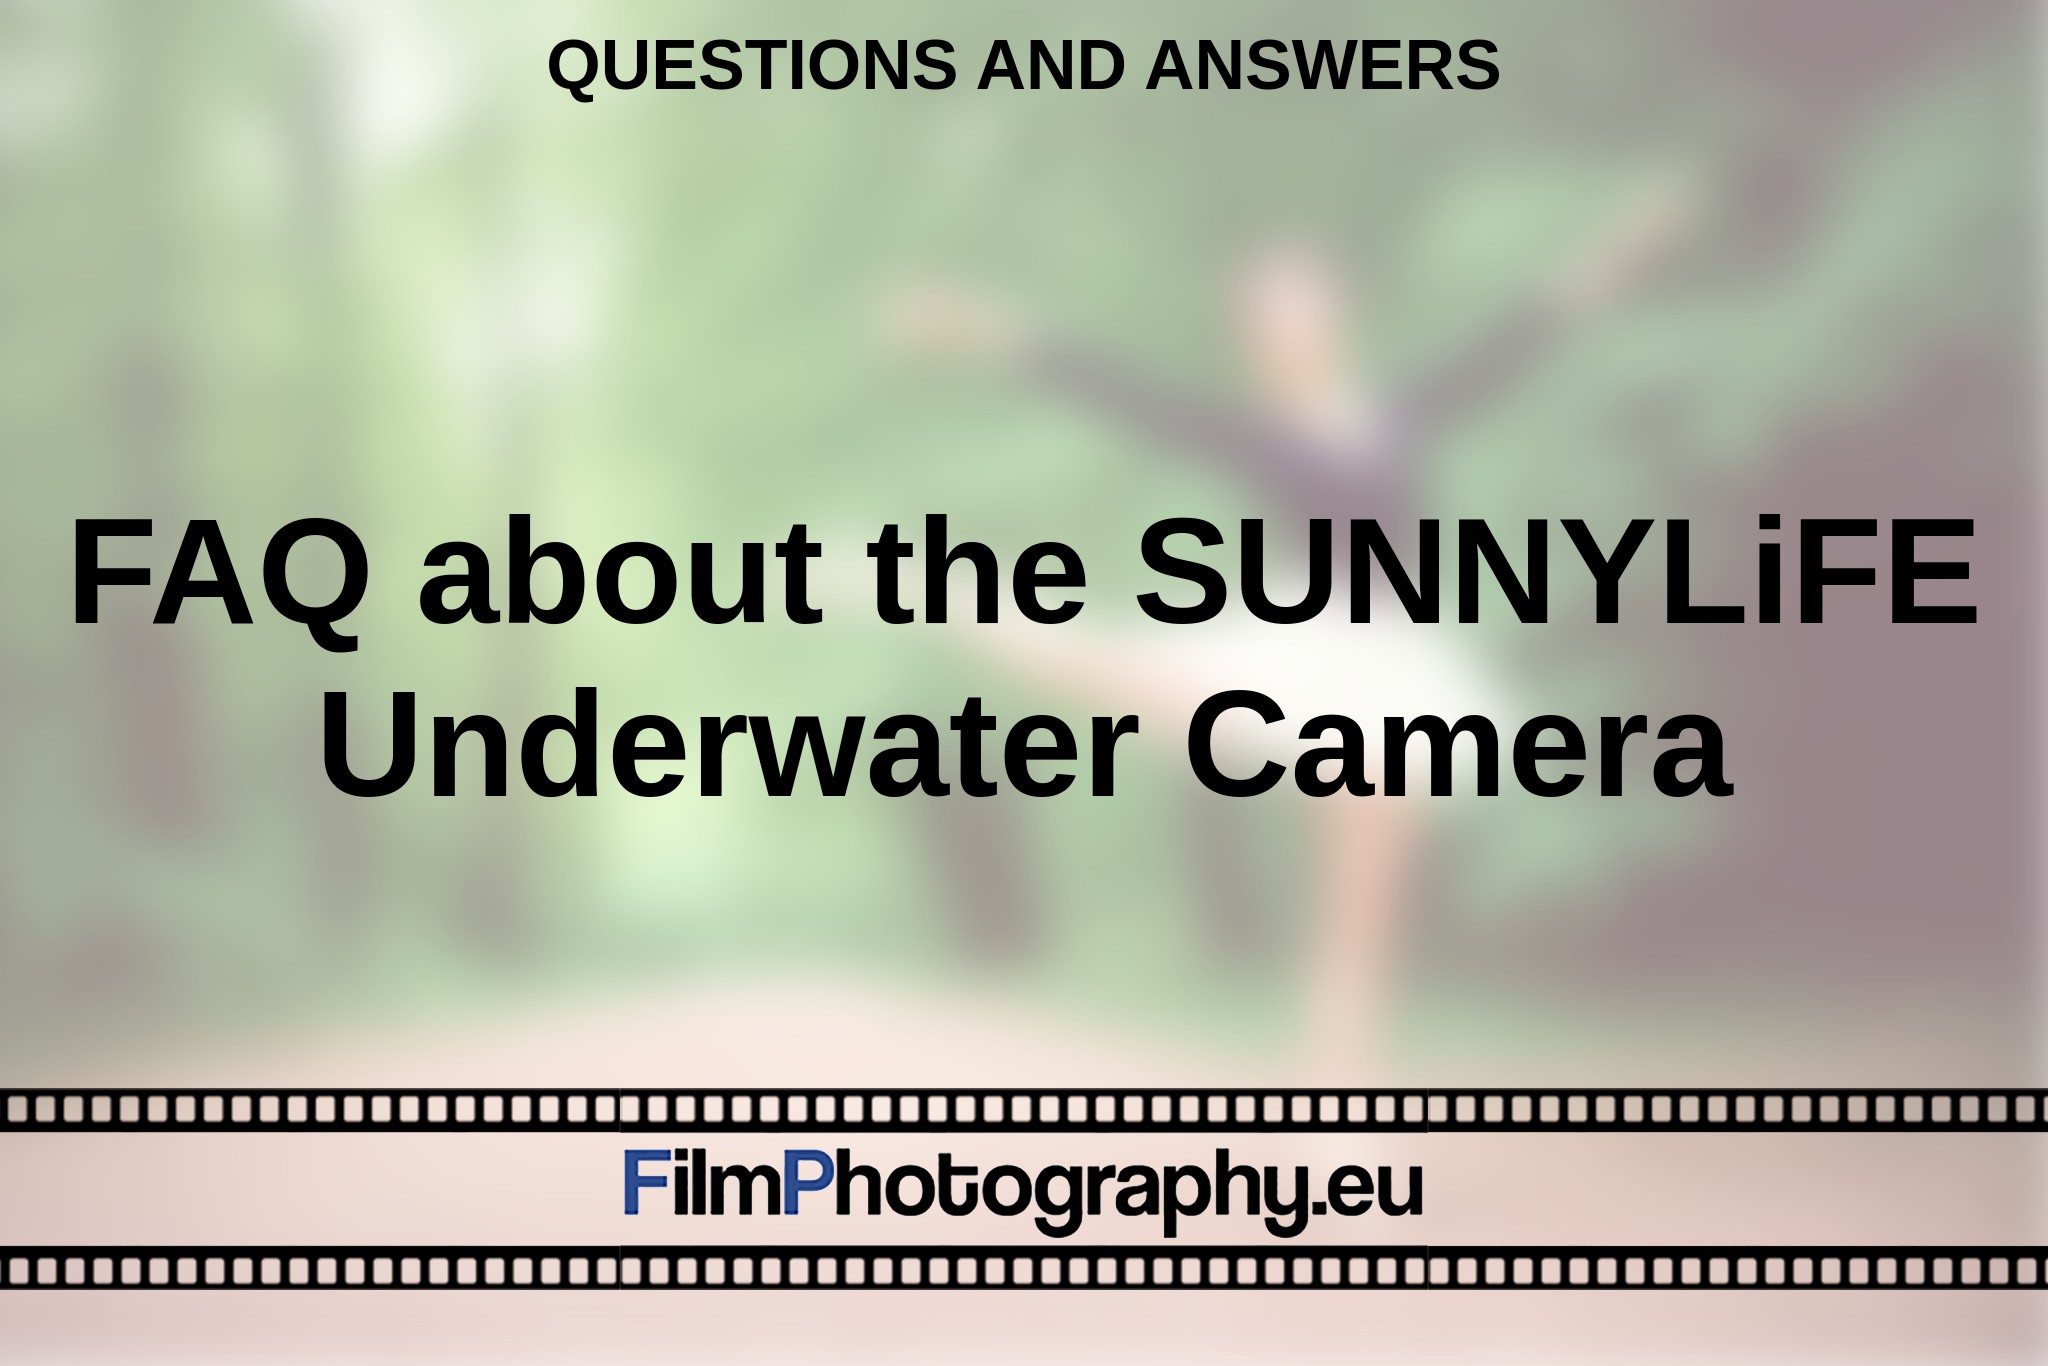 faq-about-the-sunnylife-underwater-camera-questions-and-answers-bnv.jpg